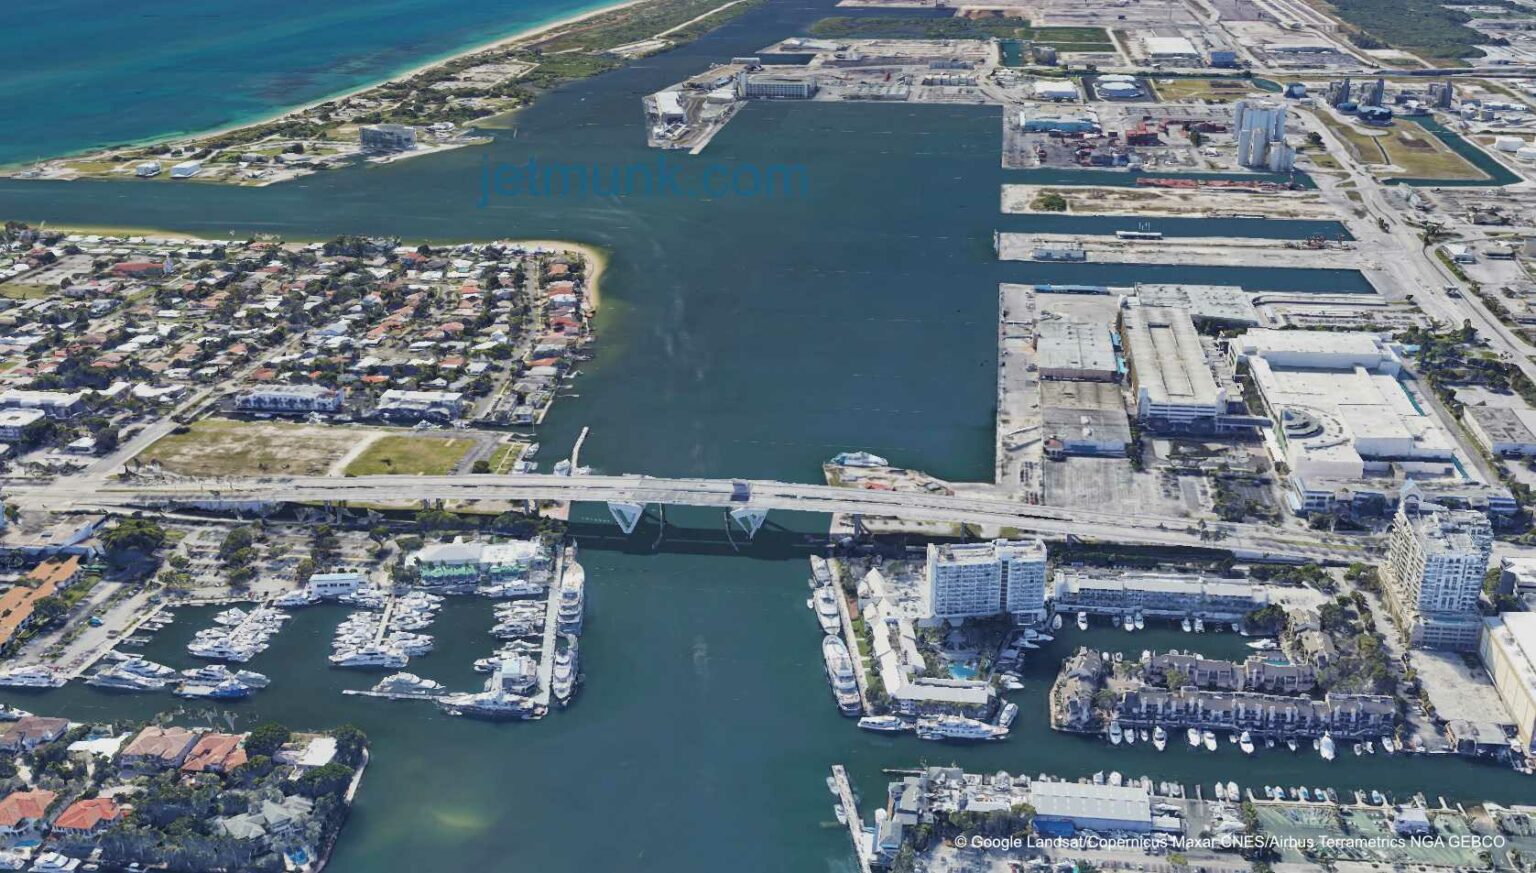 fort lauderdale celebrity cruise port map